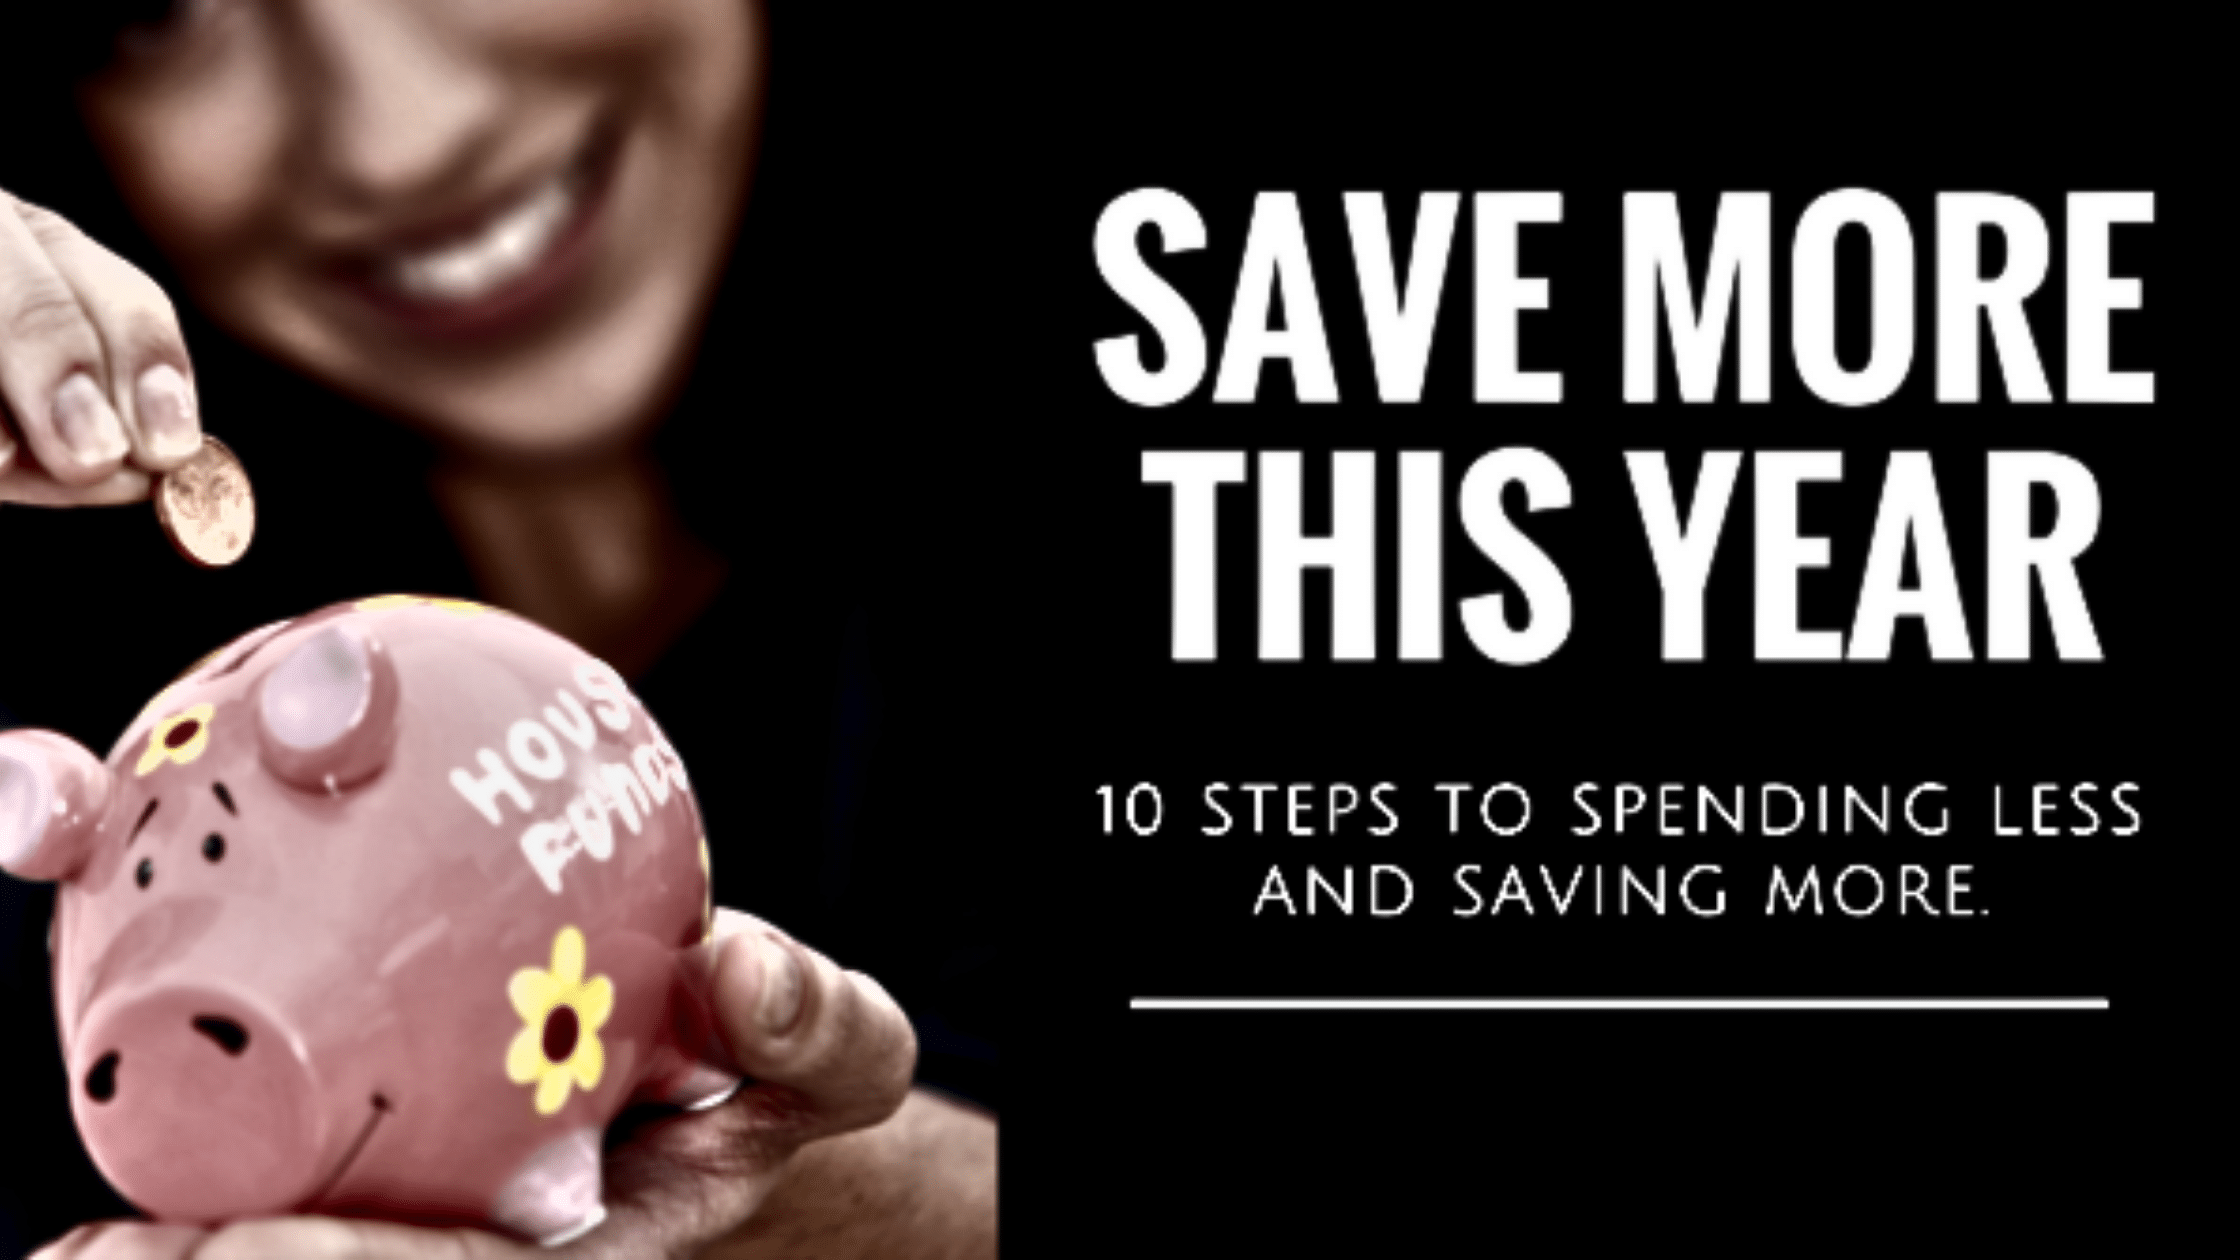 10 Steps for Saving More This Year